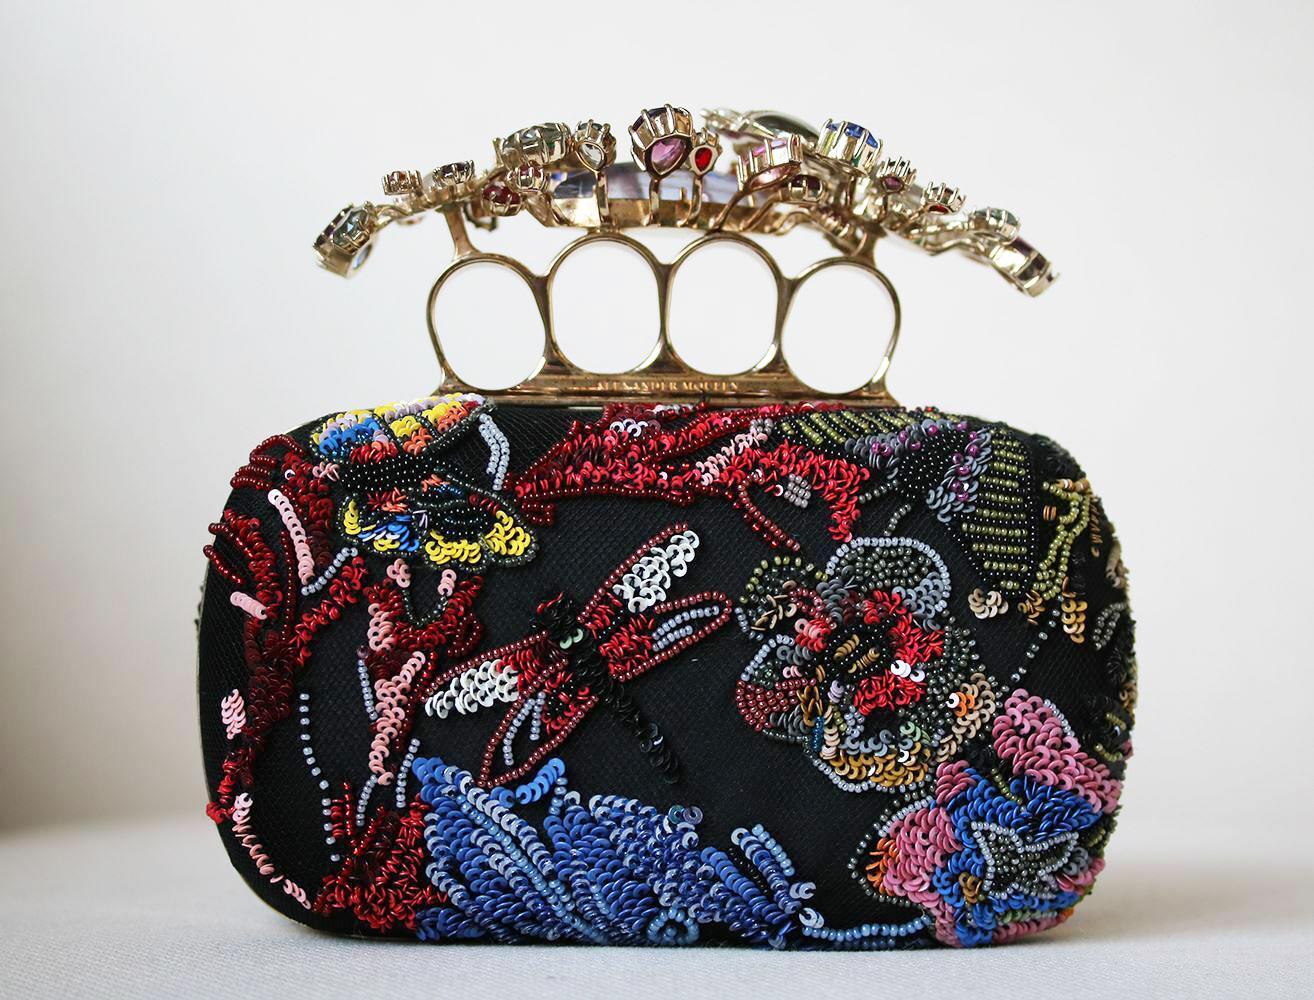 Multicolour beaded wonderland embroidery Short Knuckle Clutch. Features Swarovski crystal floral knuckle holder. Tulle and silk-satin body of the clutch and a chain strap. Brass hardware with a gold finish. Leather lining. 80% Brass, 20% satin. Does